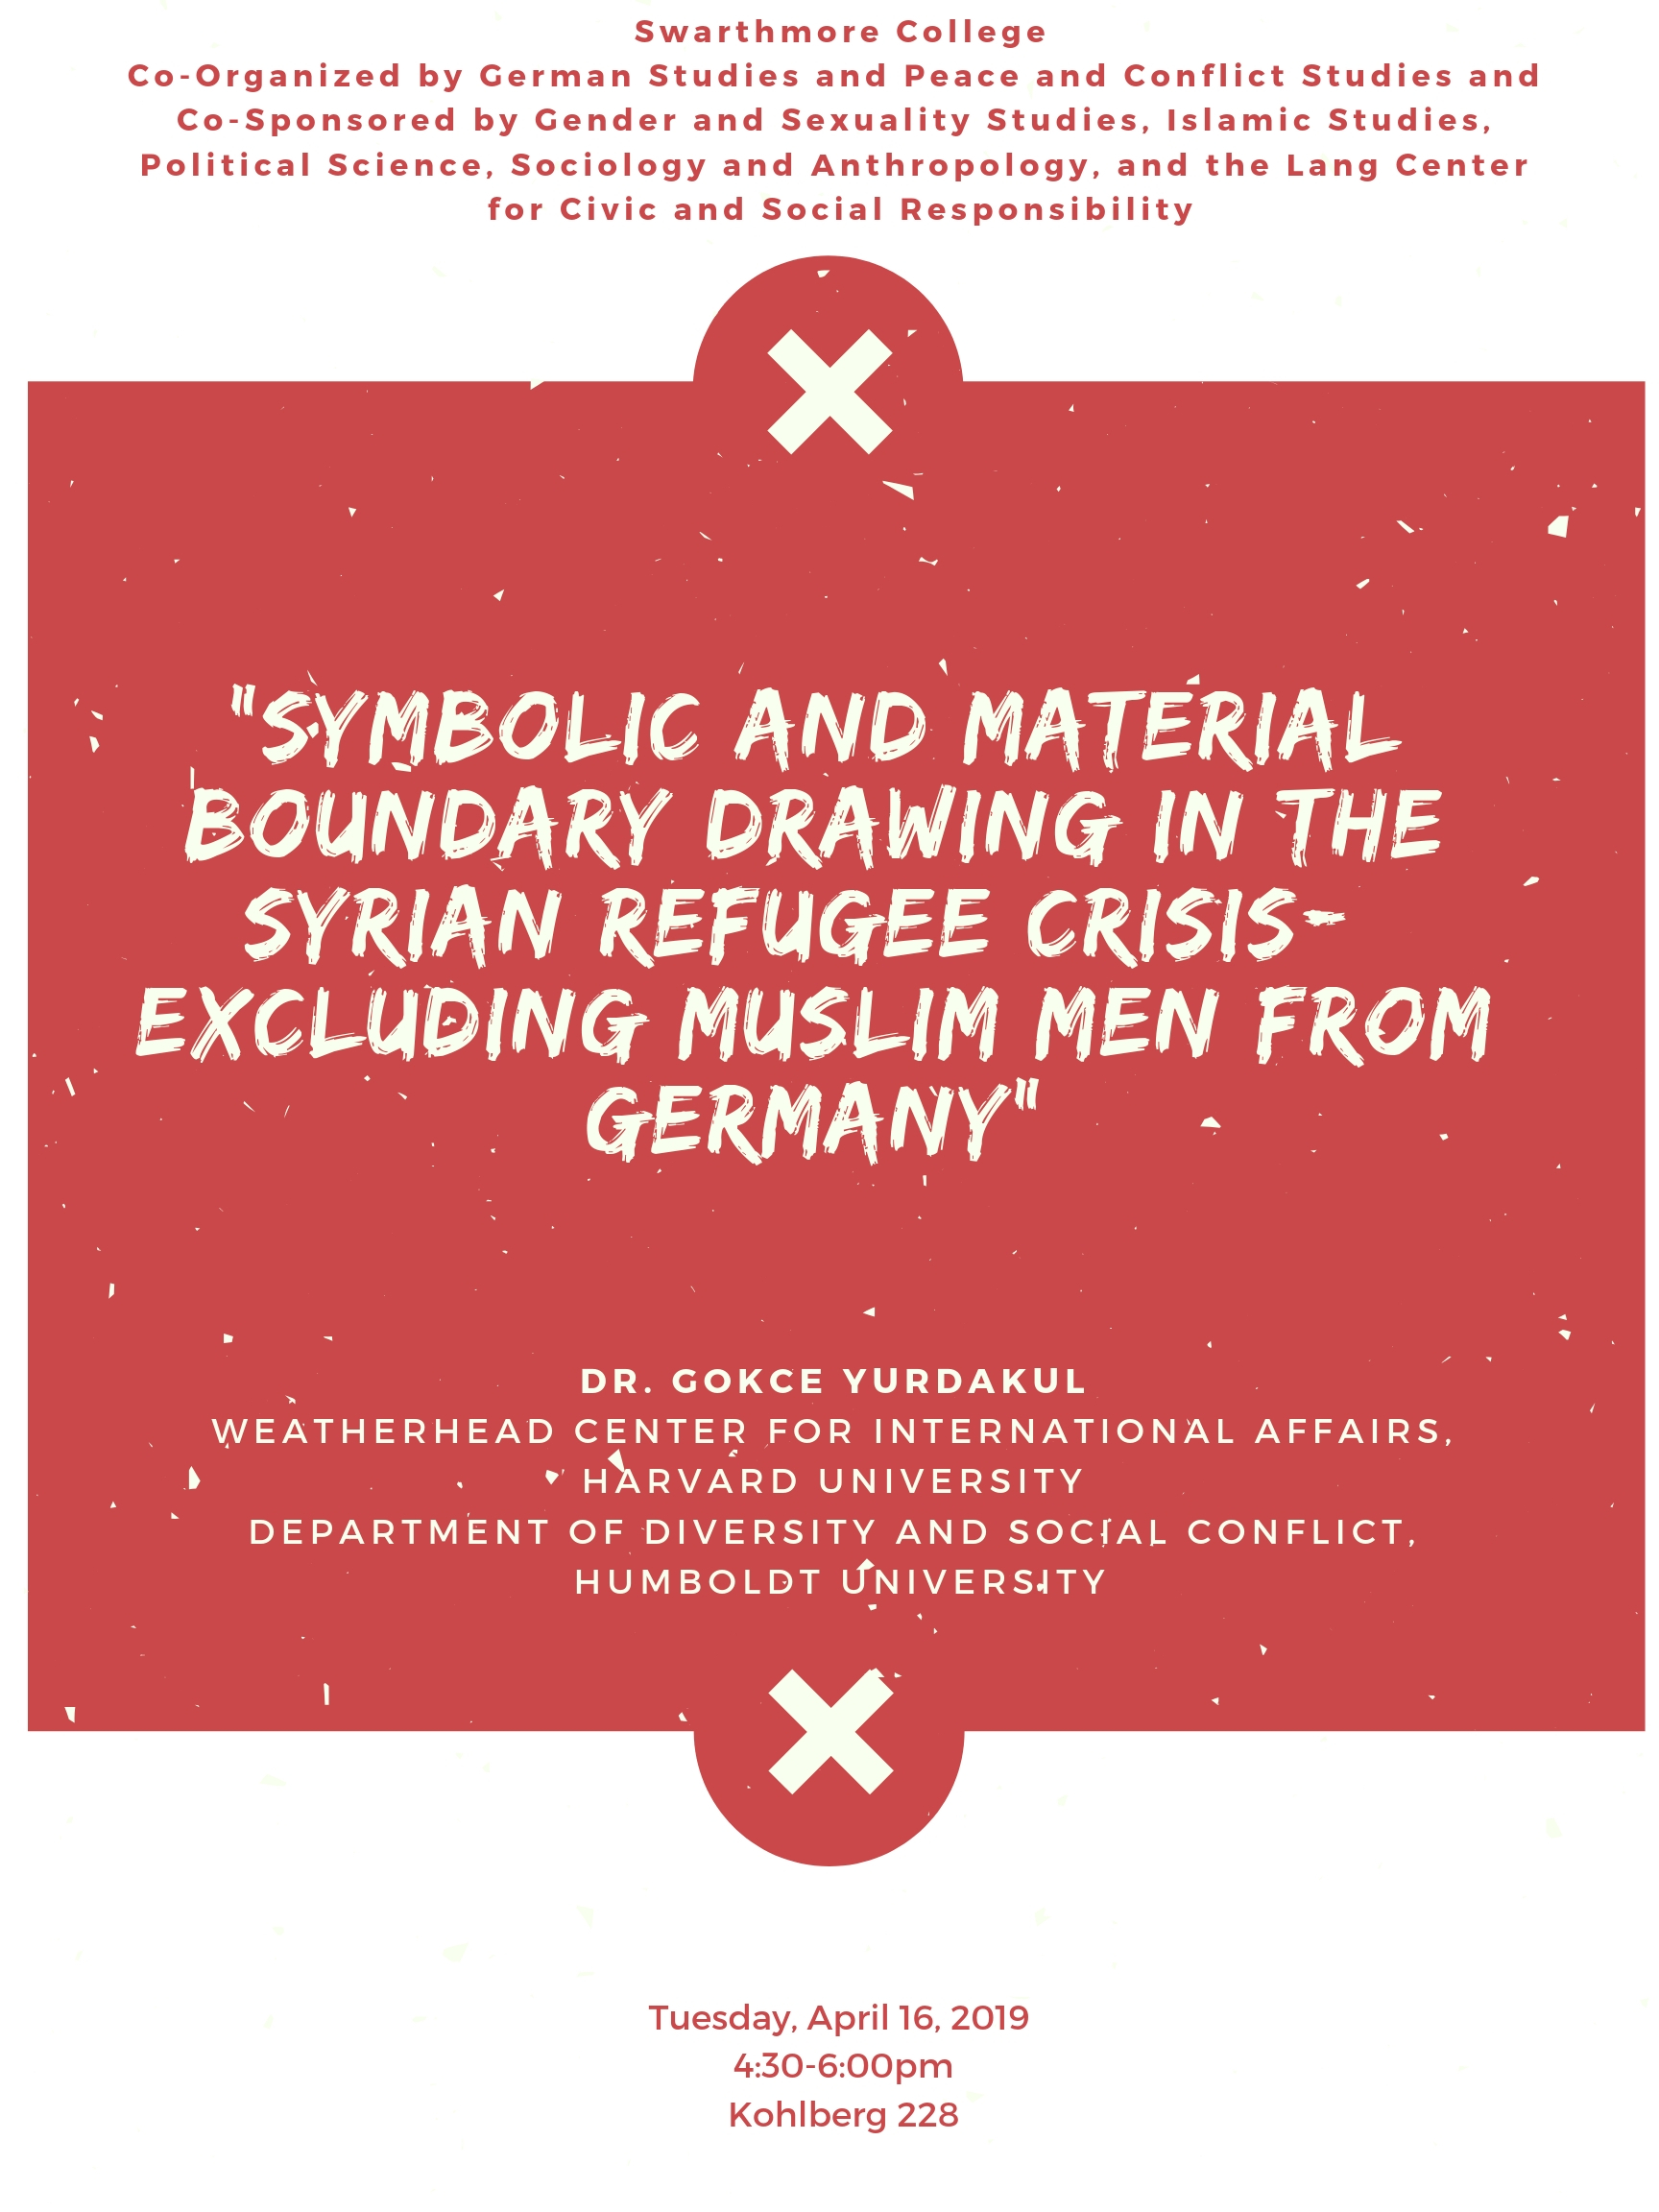 Copy of _Symbolic and Material Boundary Drawing in the Syrian Refugee Crisis_ excluding Muslim Men from Germany._